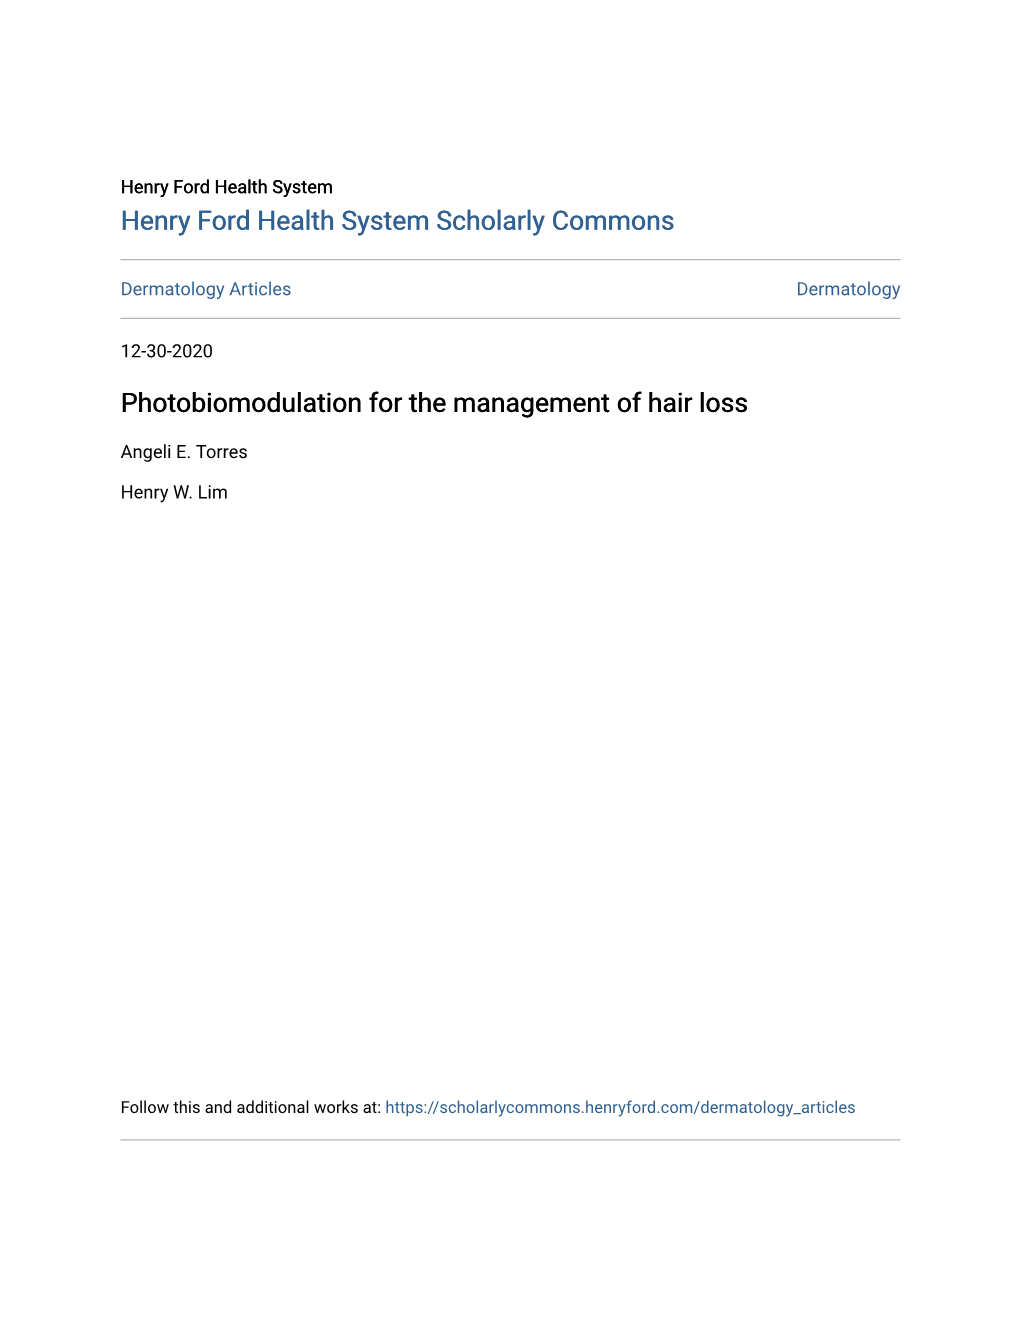 Photobiomodulation for the Management of Hair Loss